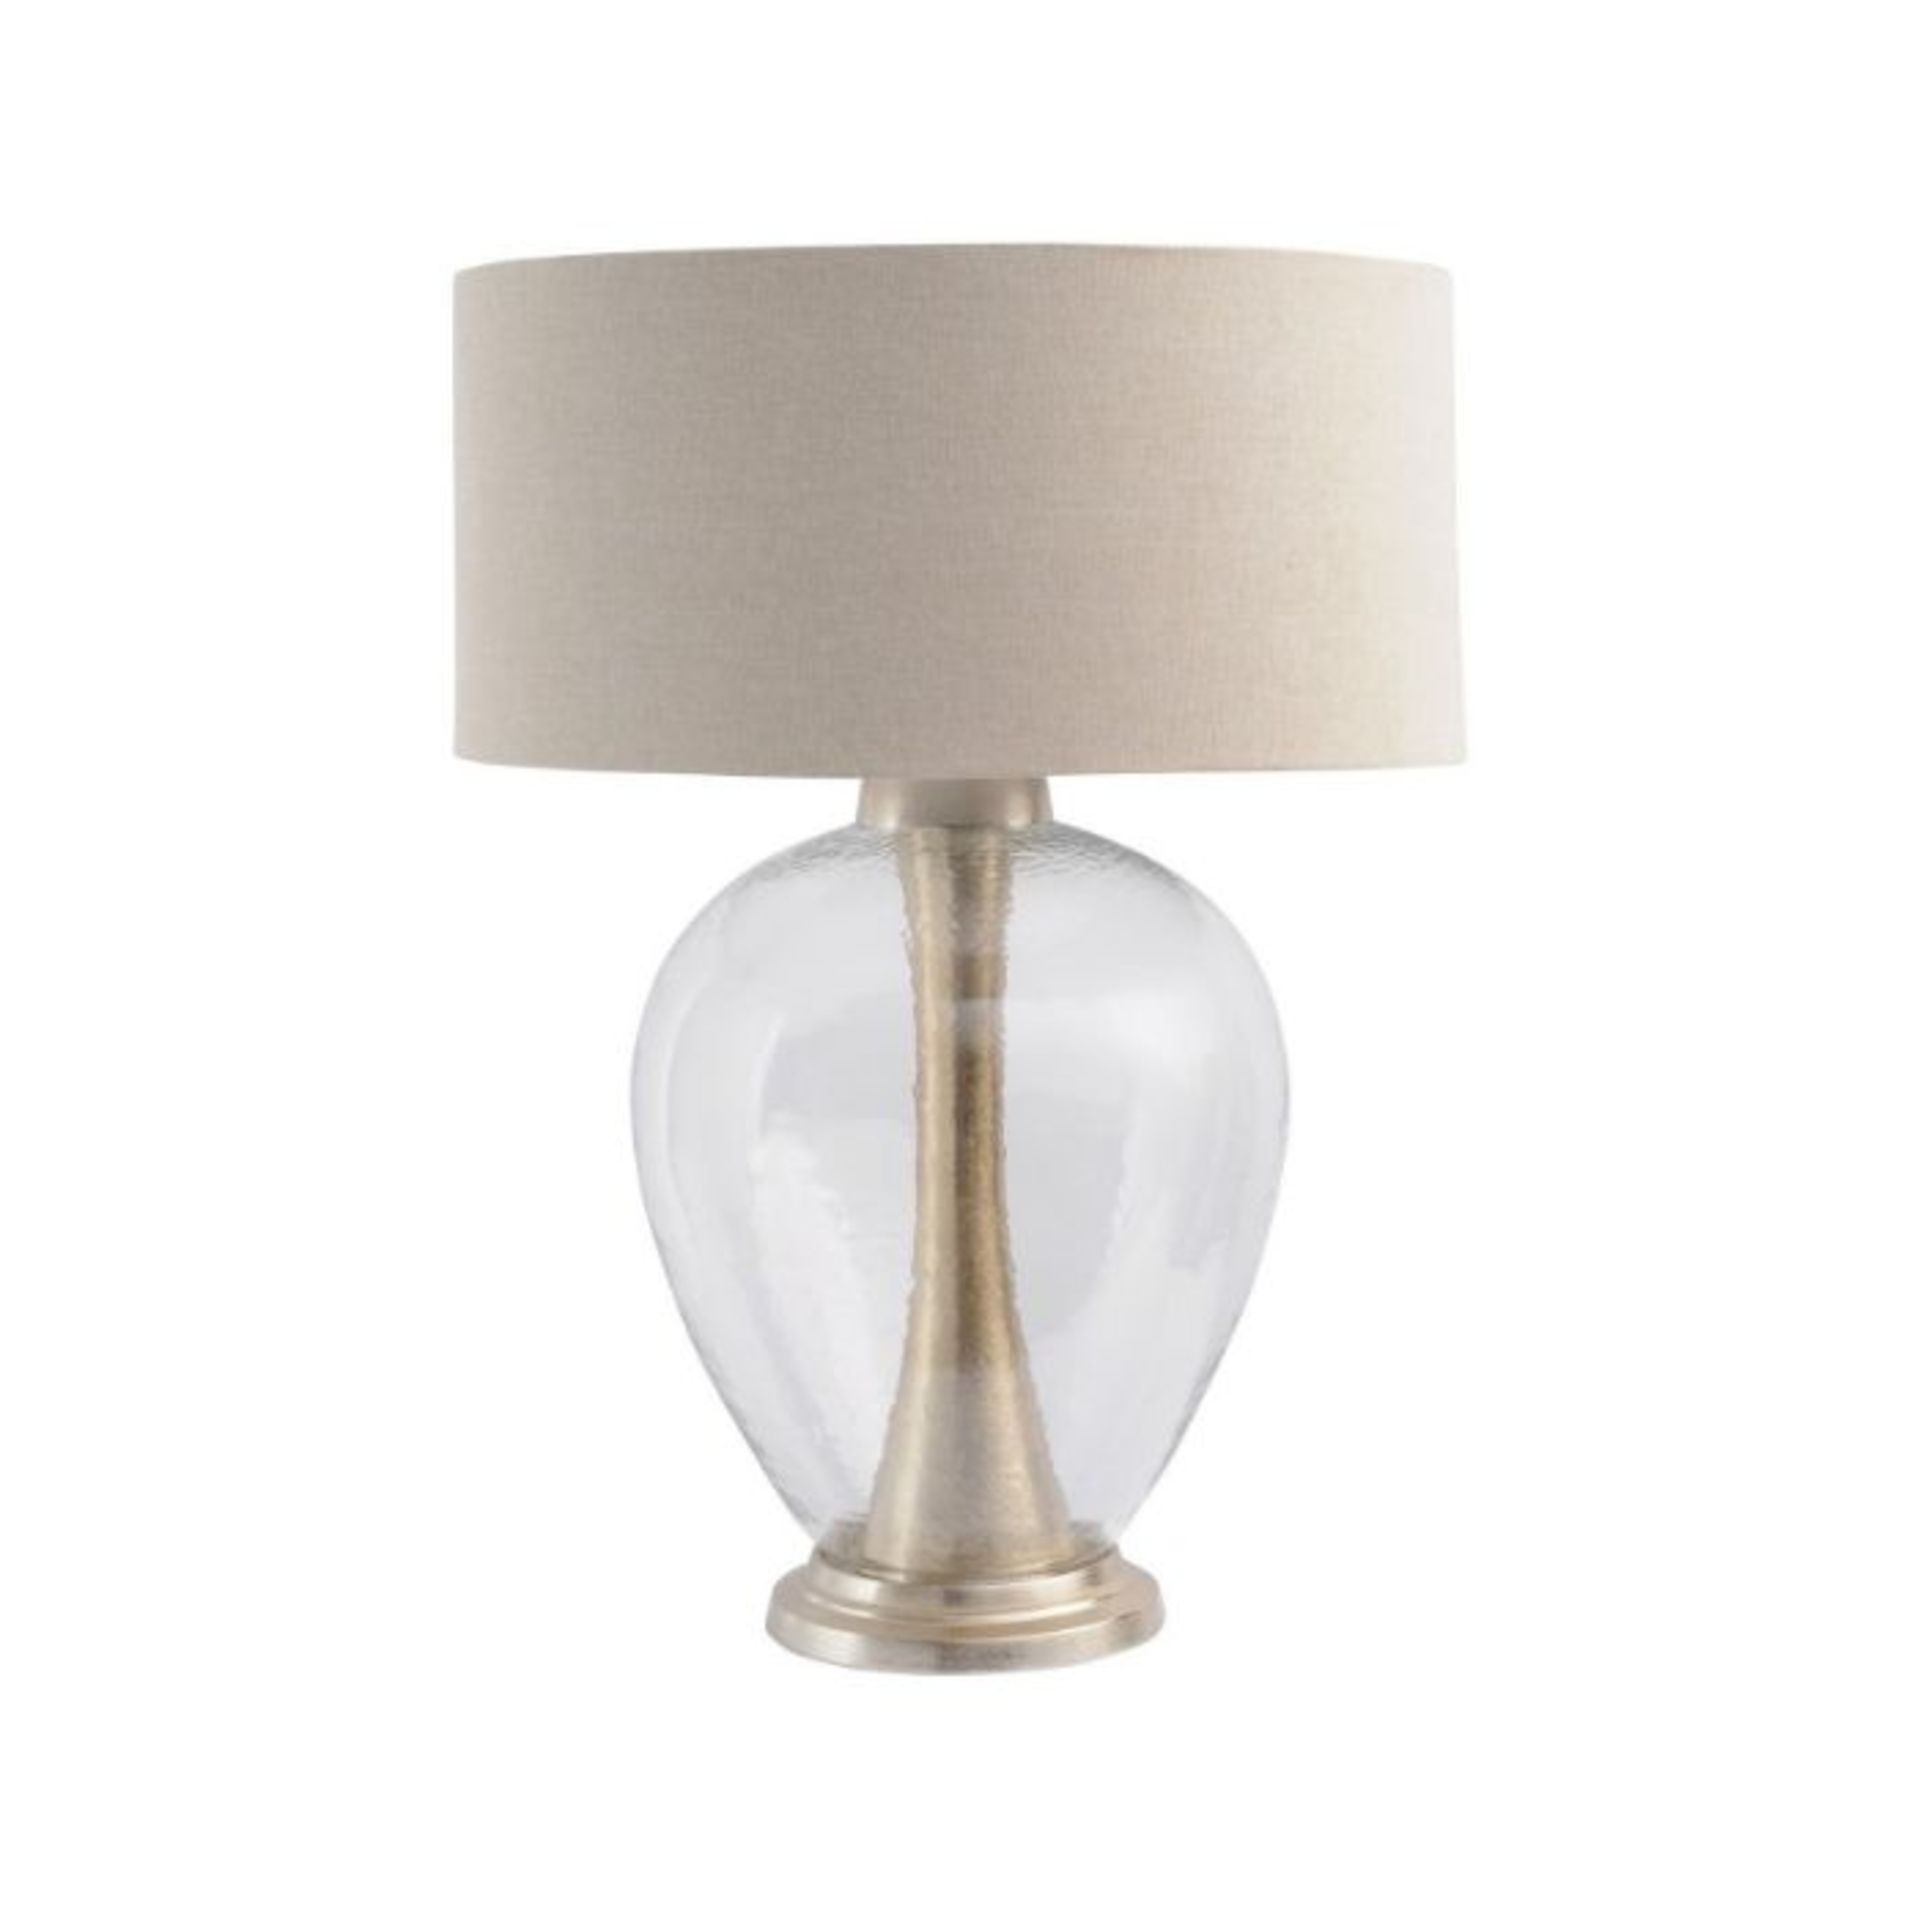 Manila Orb Glass Table Lamp Shade (BEIGE) (36 cm) (SHADE ONLY NO BASE) (463/1 -700226pt1)